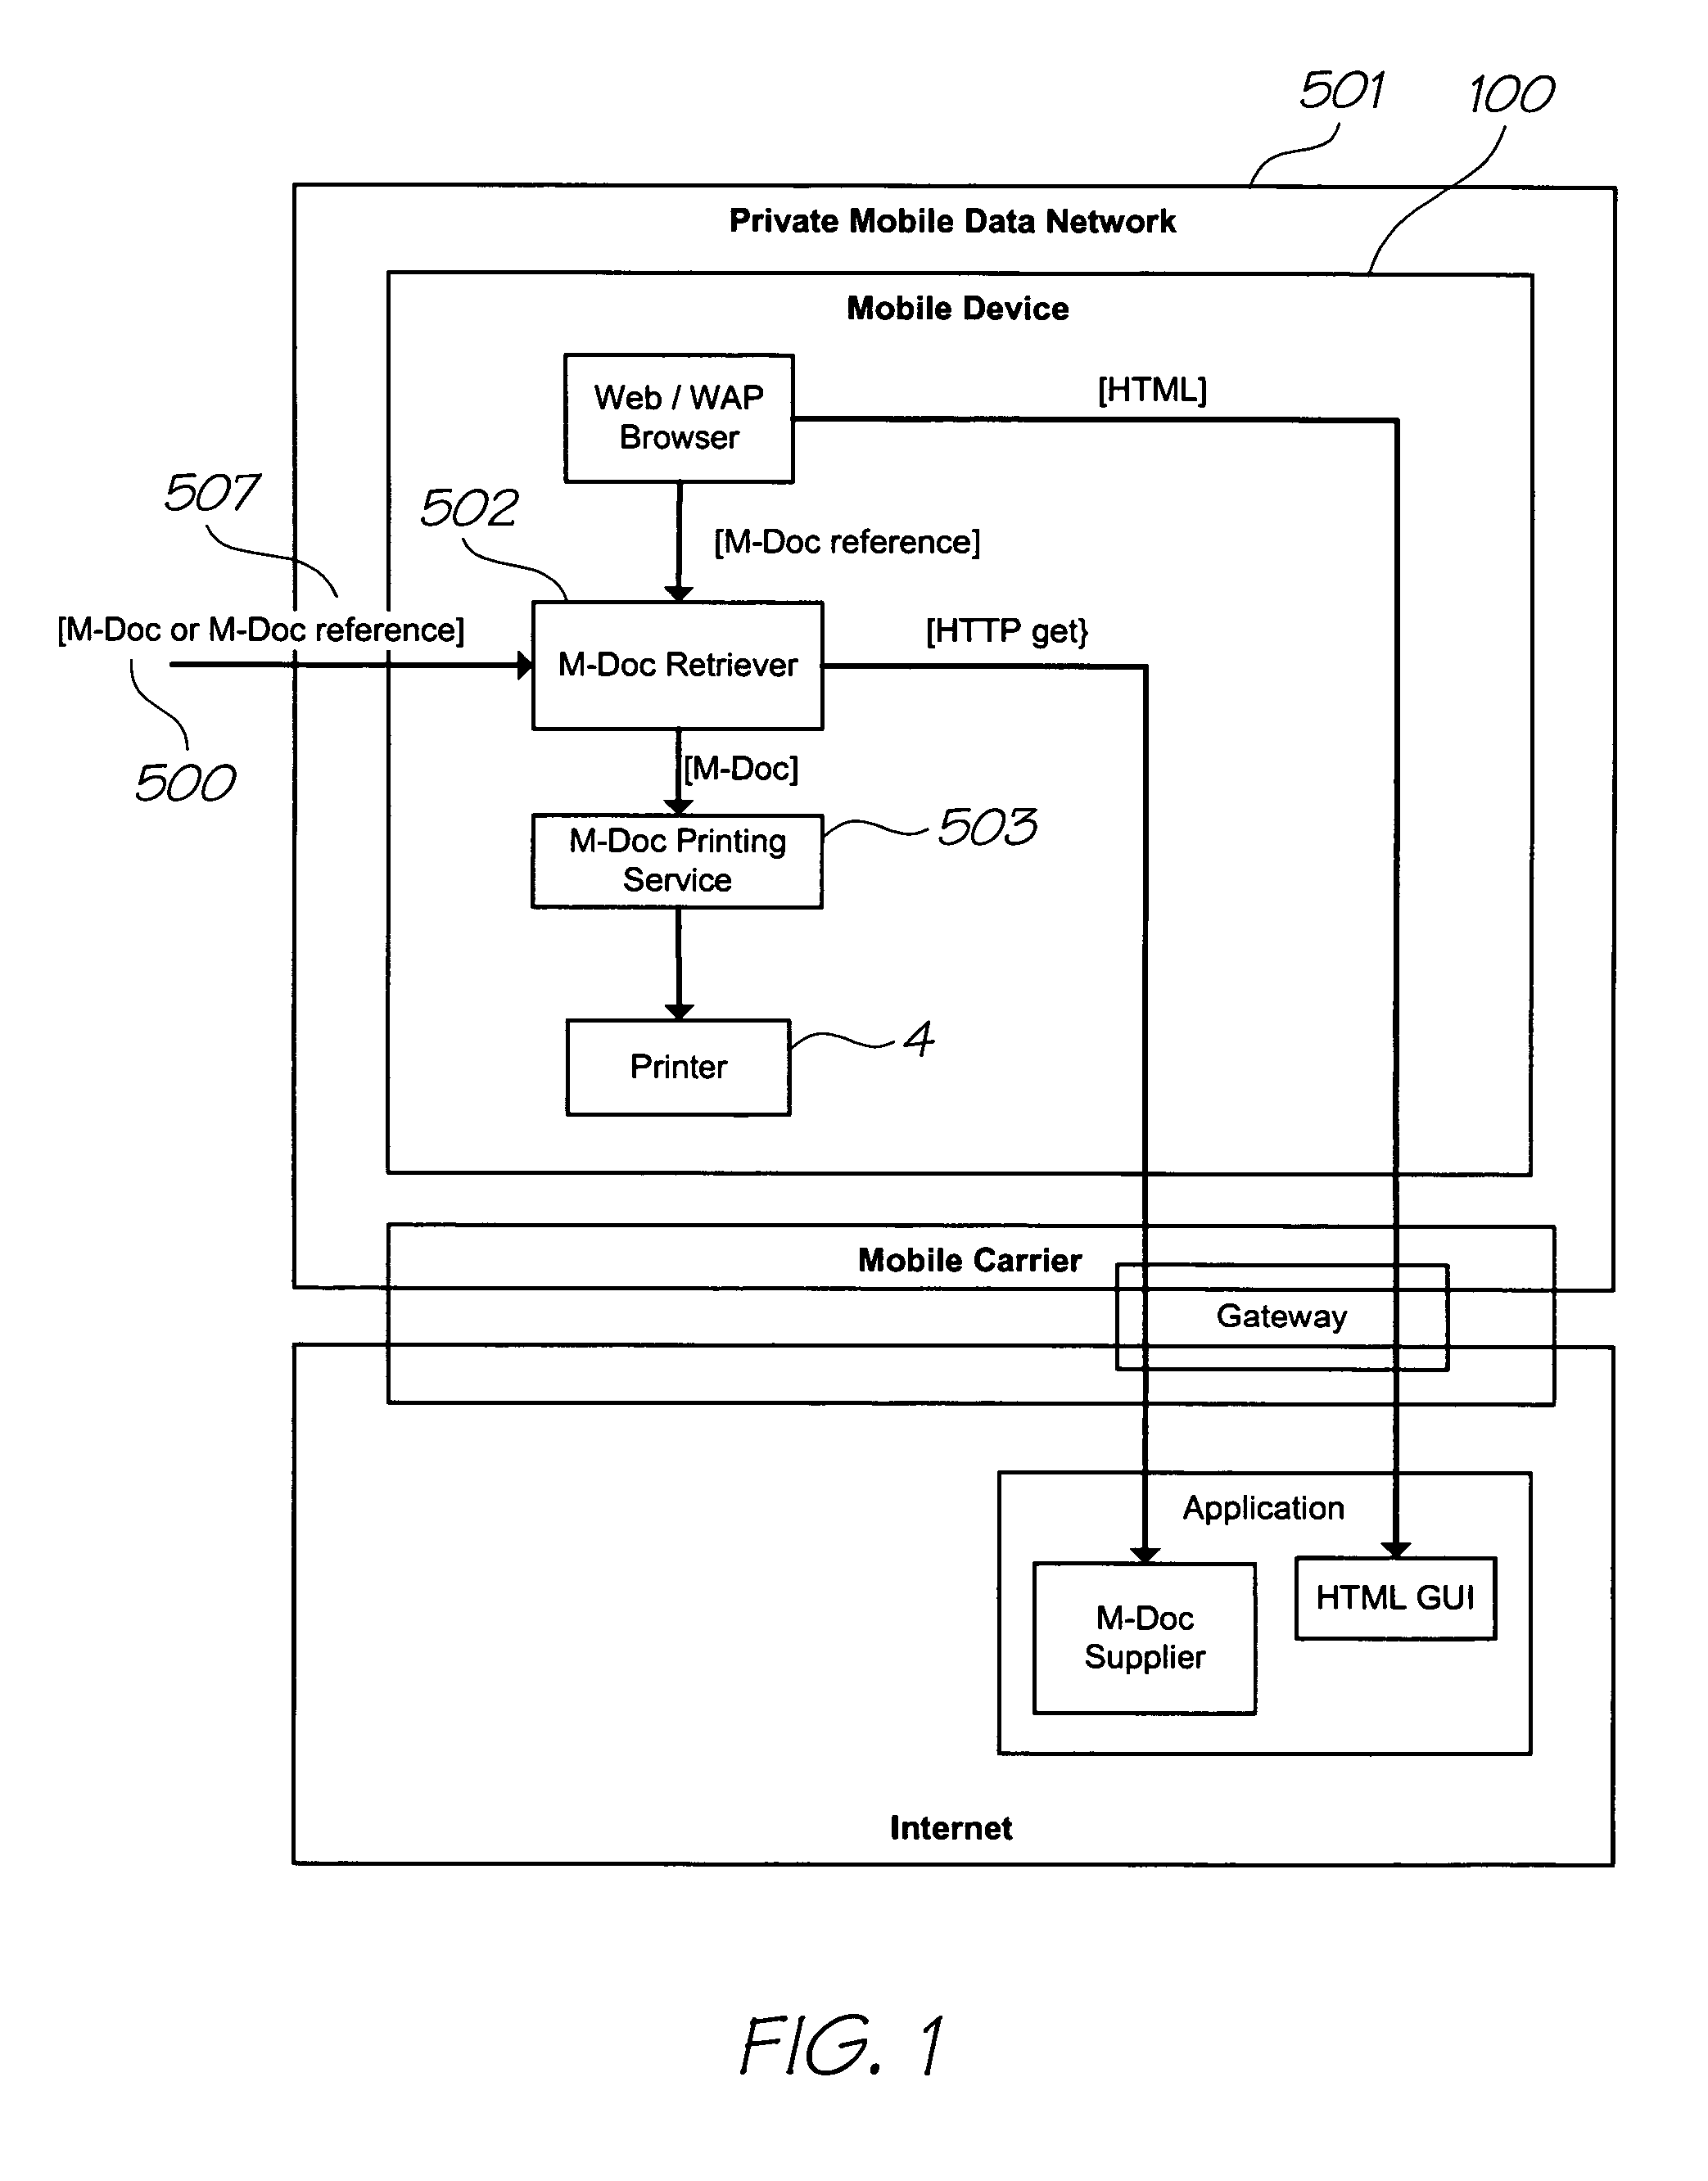 Retrieving location data by sensing coded data on a surface